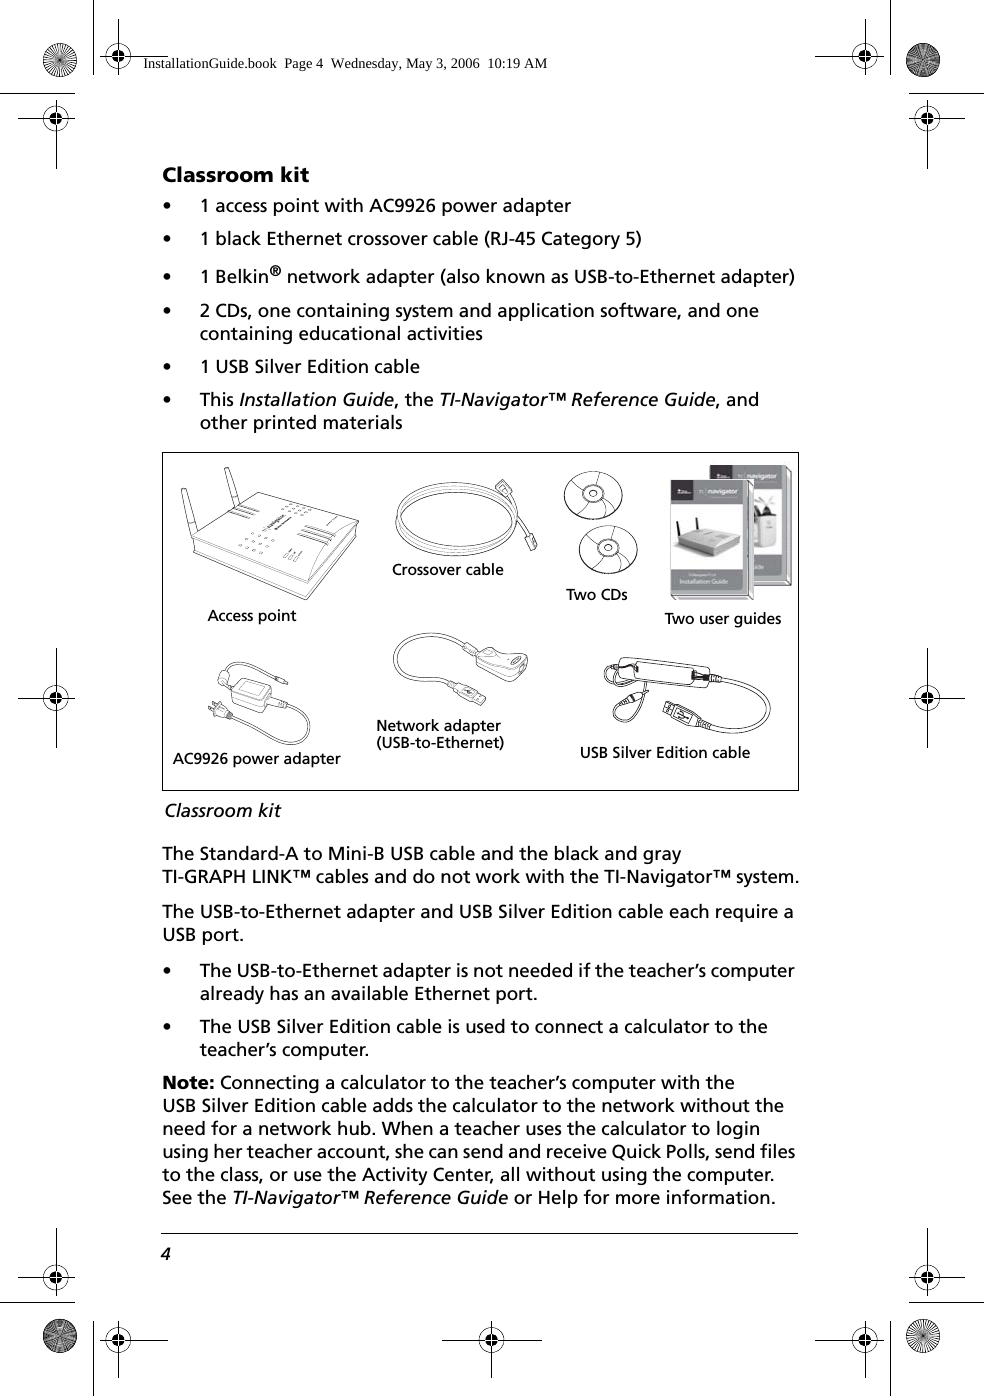 4Classroom kit• 1 access point with AC9926 power adapter• 1 black Ethernet crossover cable (RJ-45 Category 5)• 1 Belkin® network adapter (also known as USB-to-Ethernet adapter)• 2 CDs, one containing system and application software, and one containing educational activities• 1 USB Silver Edition cable •This Installation Guide, the TI-Navigator™ Reference Guide, and other printed materialsThe Standard-A to Mini-B USB cable and the black and gray TI-GRAPH LINK™ cables and do not work with the TI-Navigator™ system.The USB-to-Ethernet adapter and USB Silver Edition cable each require a USB port. • The USB-to-Ethernet adapter is not needed if the teacher’s computer already has an available Ethernet port. • The USB Silver Edition cable is used to connect a calculator to the teacher’s computer.Note: Connecting a calculator to the teacher’s computer with the USB Silver Edition cable adds the calculator to the network without the need for a network hub. When a teacher uses the calculator to login using her teacher account, she can send and receive Quick Polls, send files to the class, or use the Activity Center, all without using the computer. See the TI-Navigator™ Reference Guide or Help for more information.Access pointCrossover cableNetwork adapter(USB-to-Ethernet)AC9926 power adapter USB Silver Edition cableTwo CDsClassroom kitTwo user guidesInstallationGuide.book  Page 4  Wednesday, May 3, 2006  10:19 AM